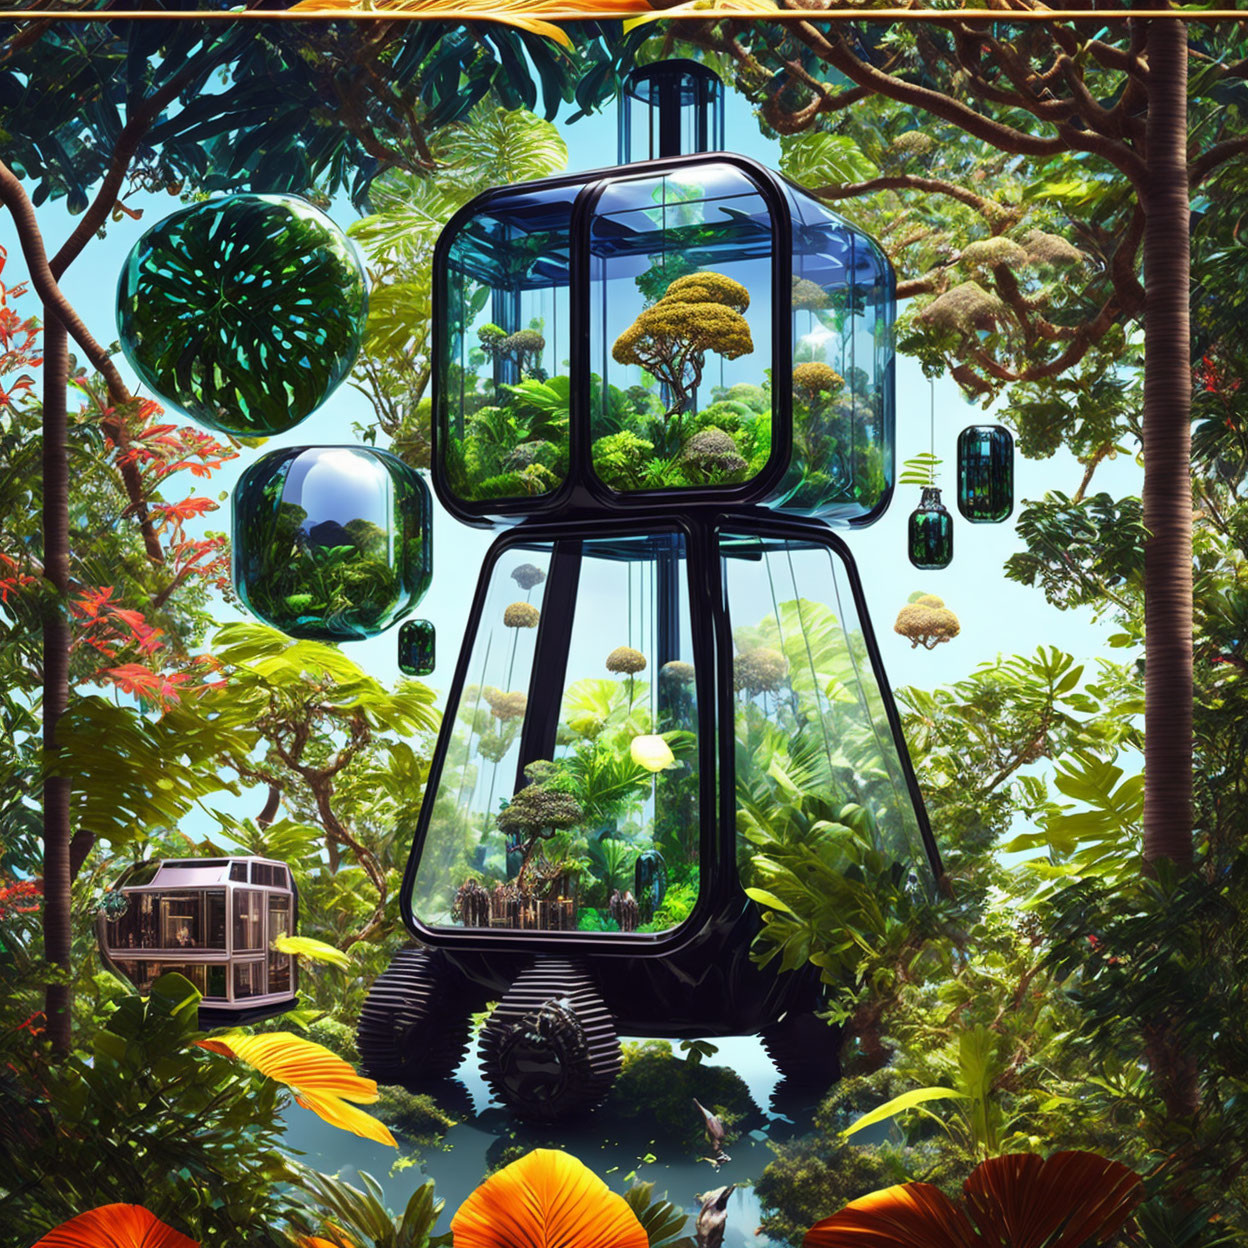 Transparent Multi-Level Pods in Futuristic Mobile Greenhouse surrounded by Dense Jungle